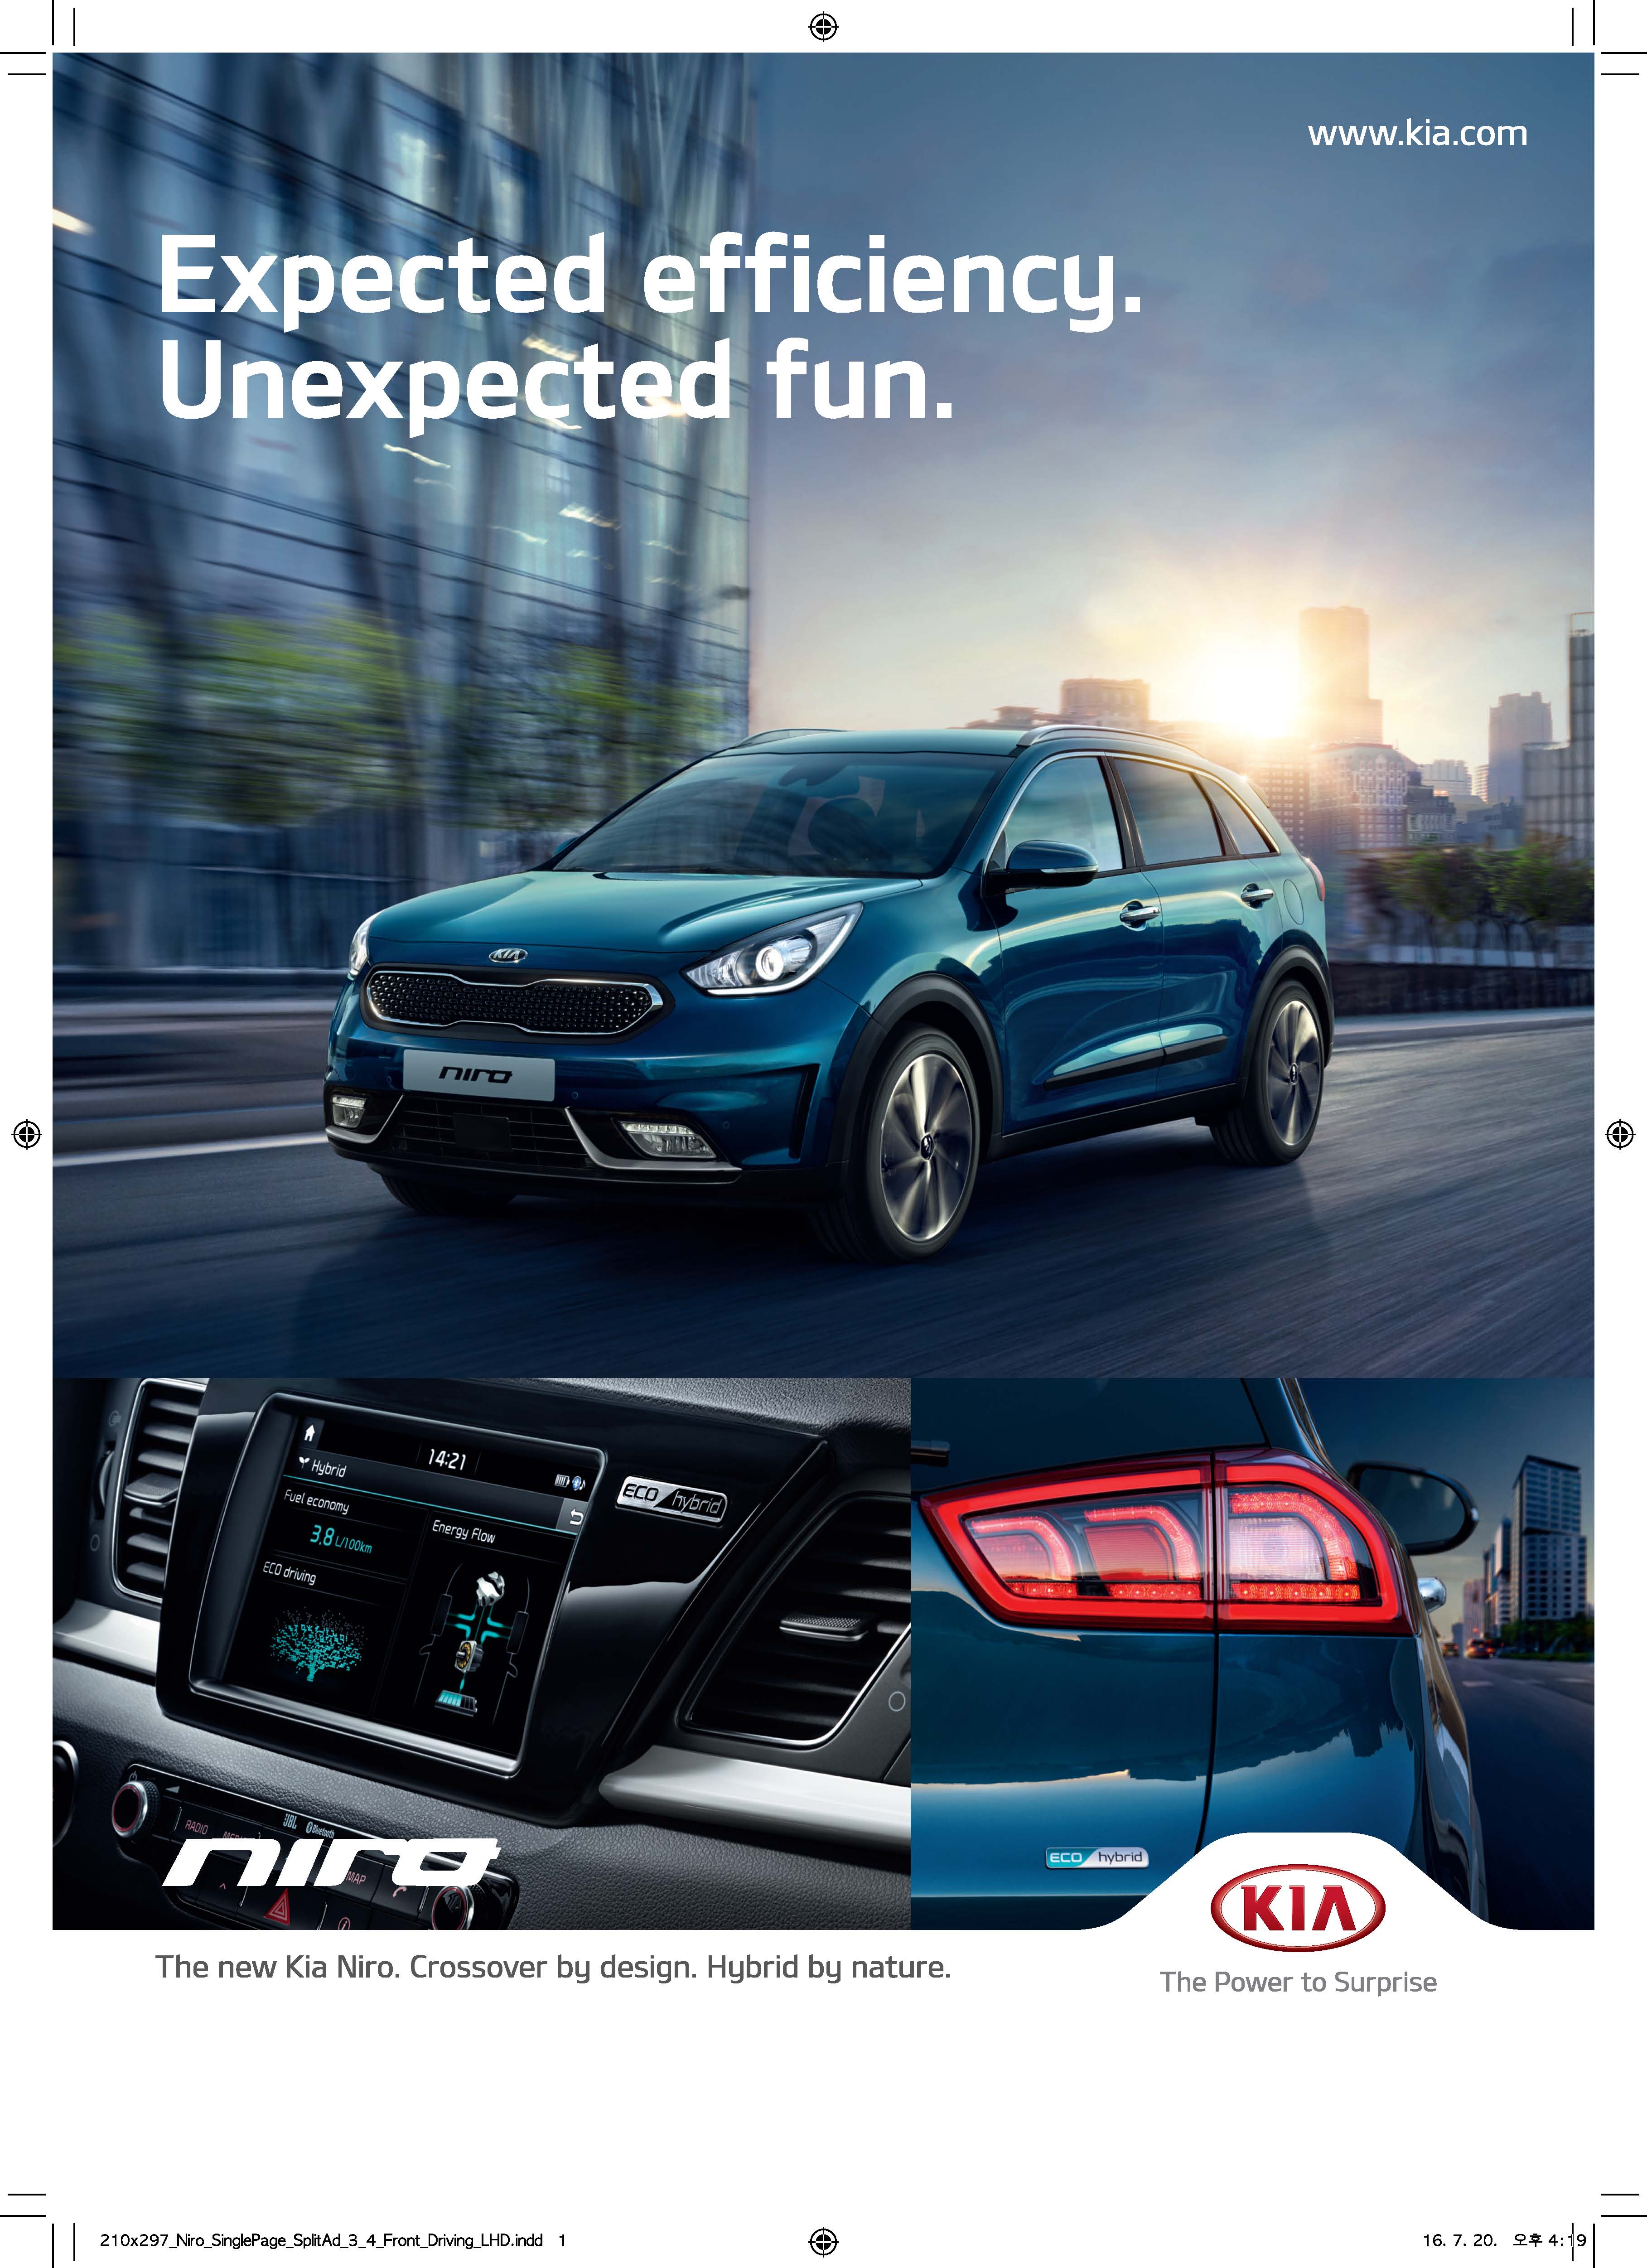 Al Majid Motors and KIA Motors Uses 3rd International Conference on Future Mobility to Launch introduces ‘Niro HEV’